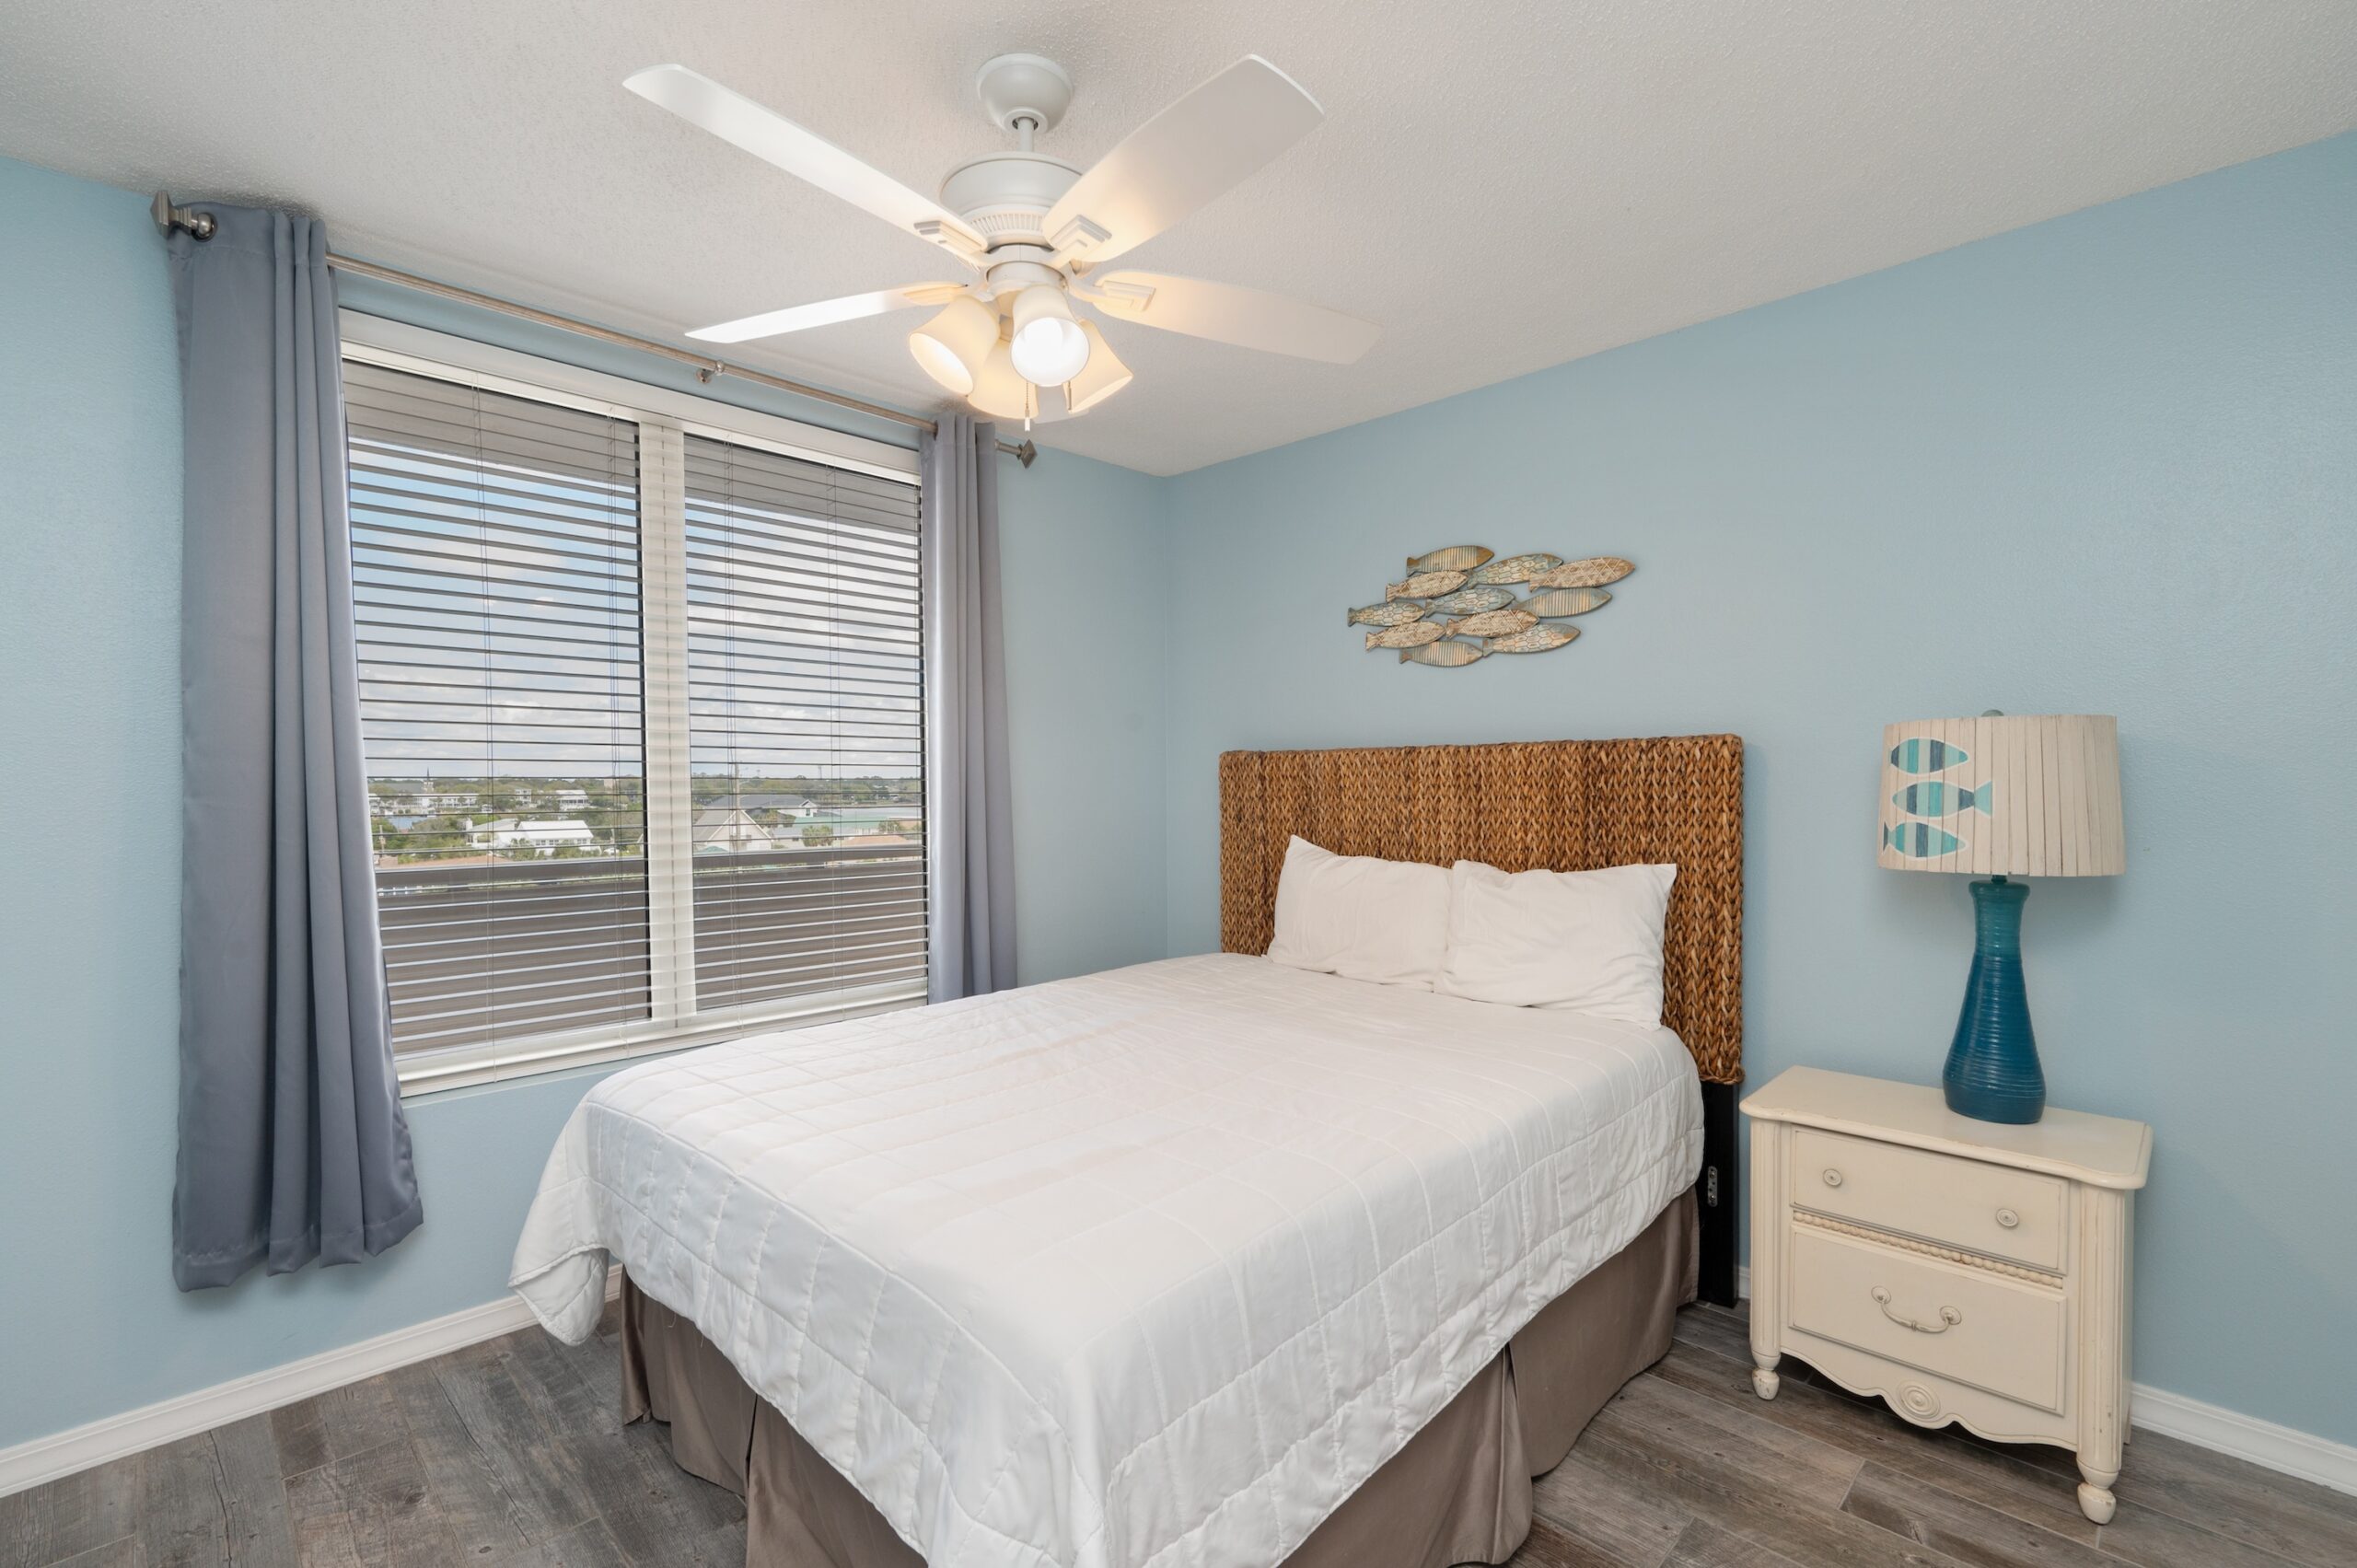 A queen bed in the second bedroom of our Okaloosa Island beach rental